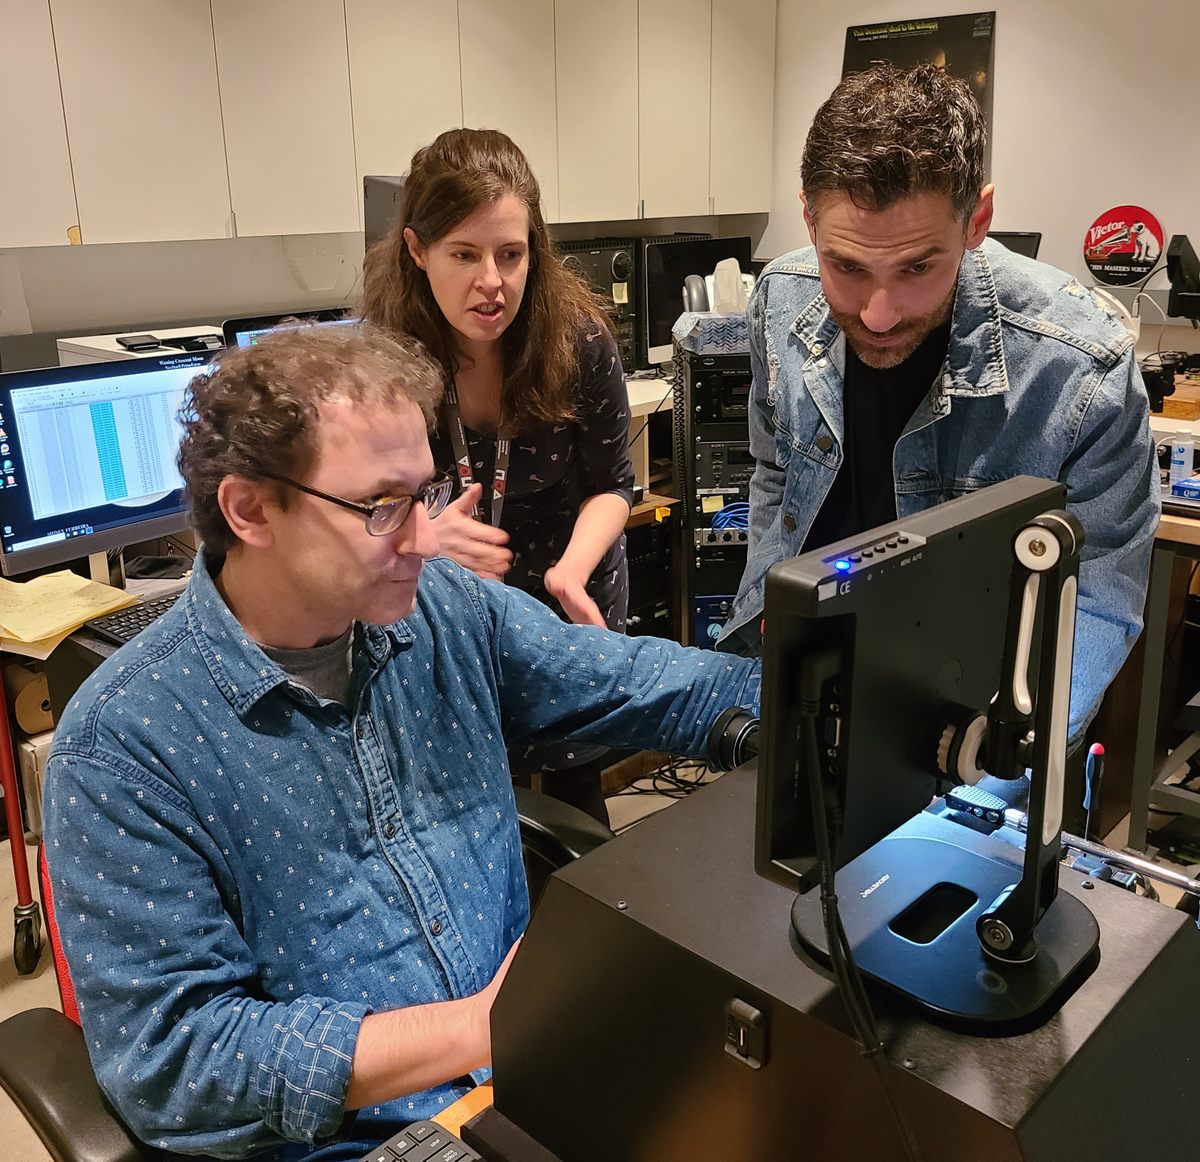 Jeff Willens (left), media preservation engineer, digitizes one of the library's wax cylinders with the Endpoint machine for the first time.  Jessica Wood, assistant curator of music and recorded sound, and Ben Turkus (right), media preservation labs manager, look on.